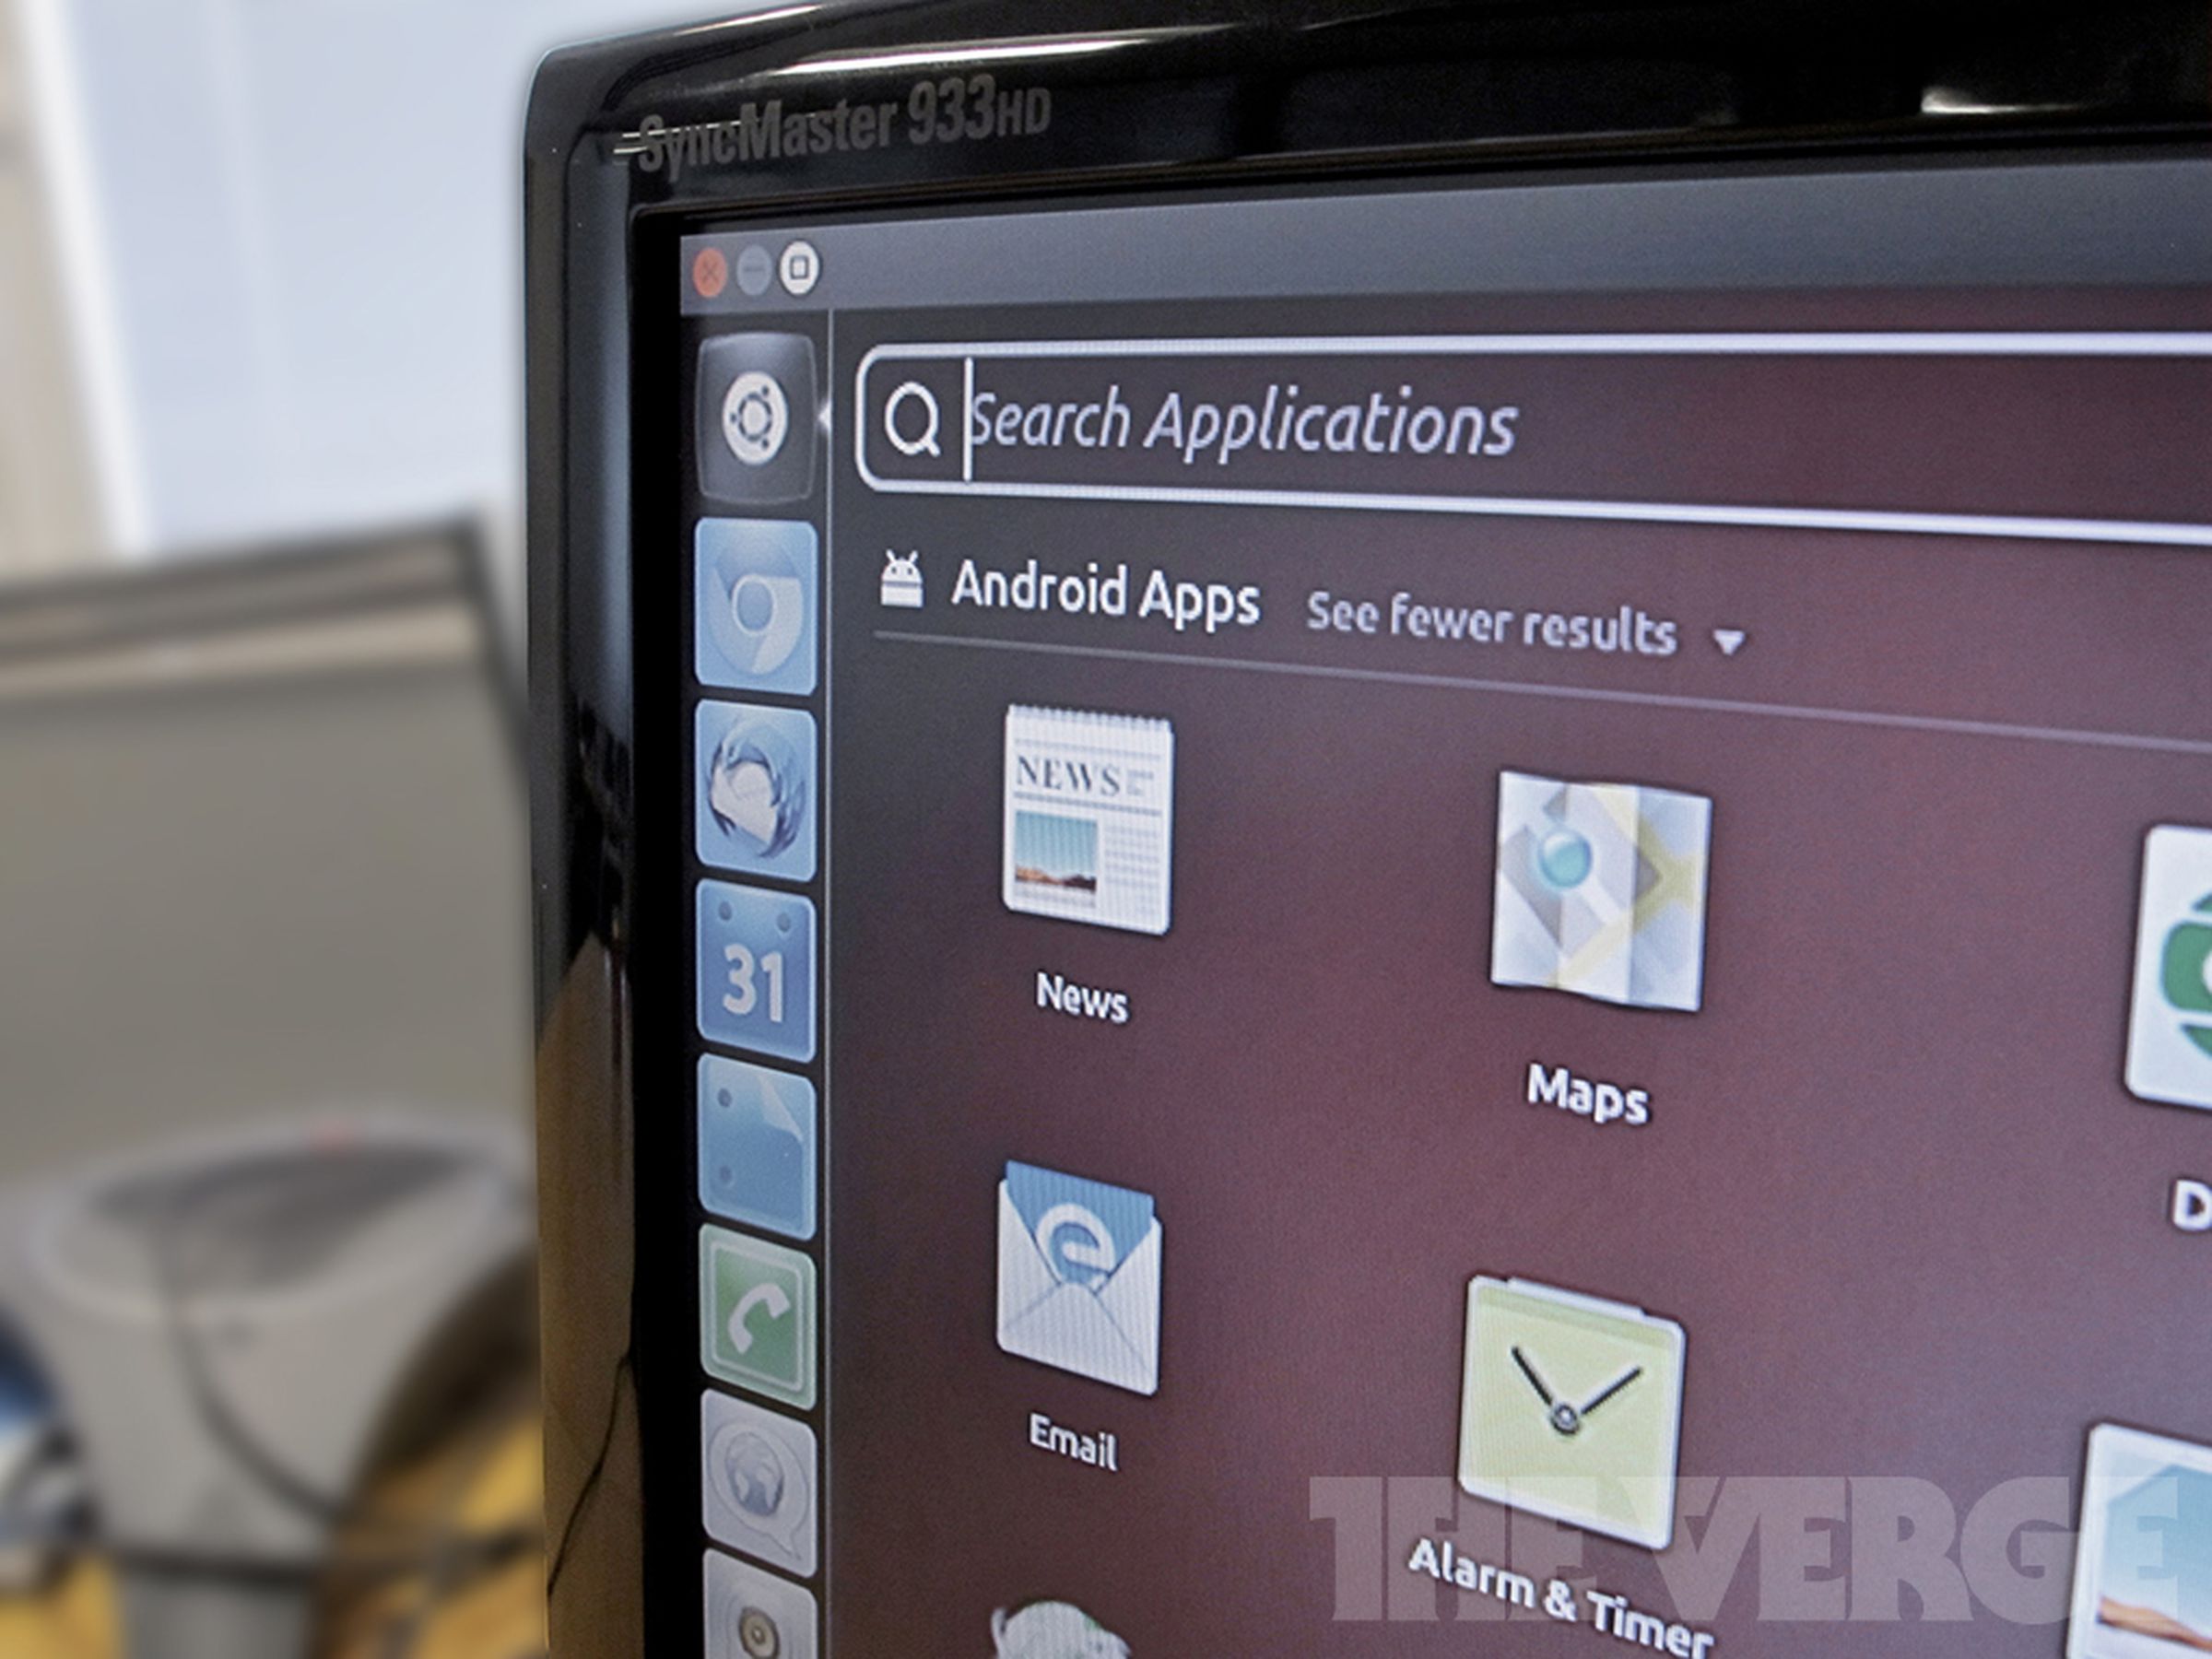 Ubuntu for Android: hands-on images